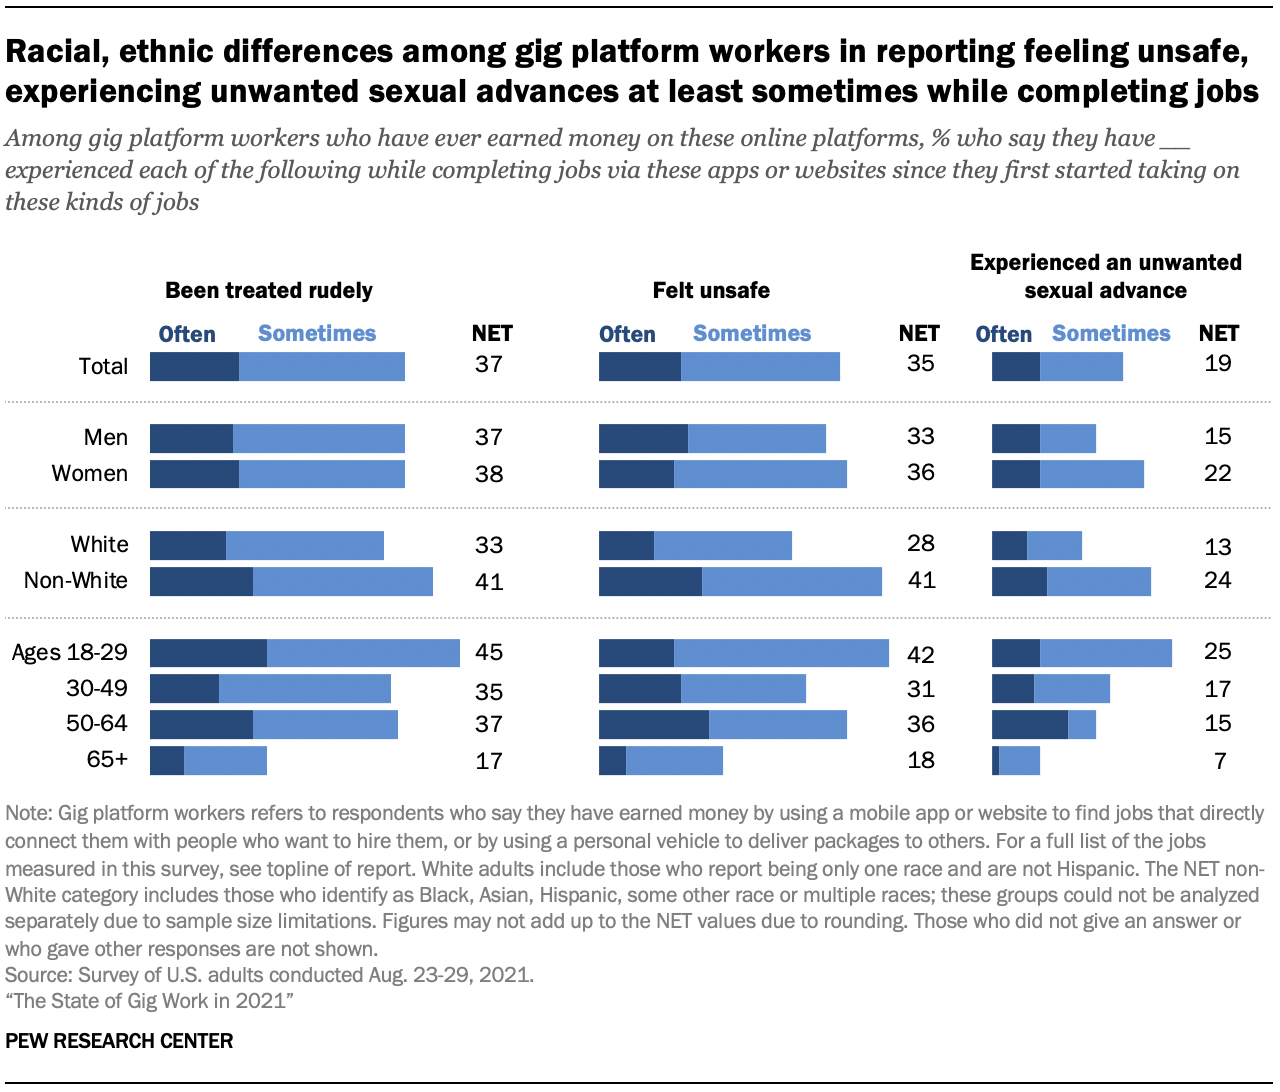 Racial, ethnic differences among gig platform workers in reporting feeling unsafe, experiencing unwanted sexual advances at least sometimes while completing jobs